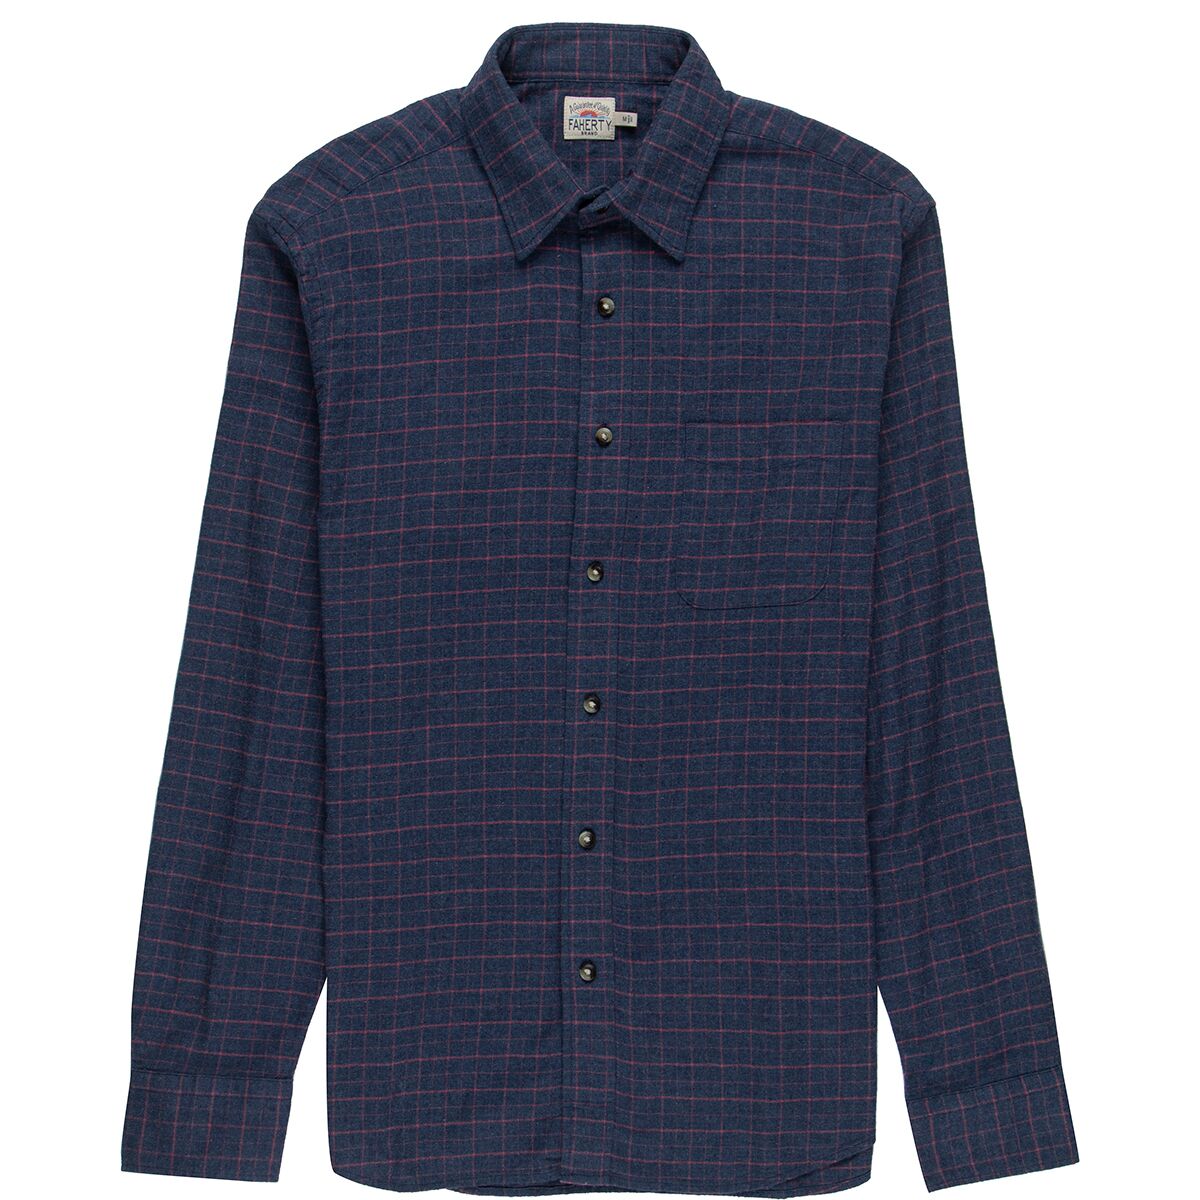 Faherty Stretch Featherweight Flannel Shirt - Men's